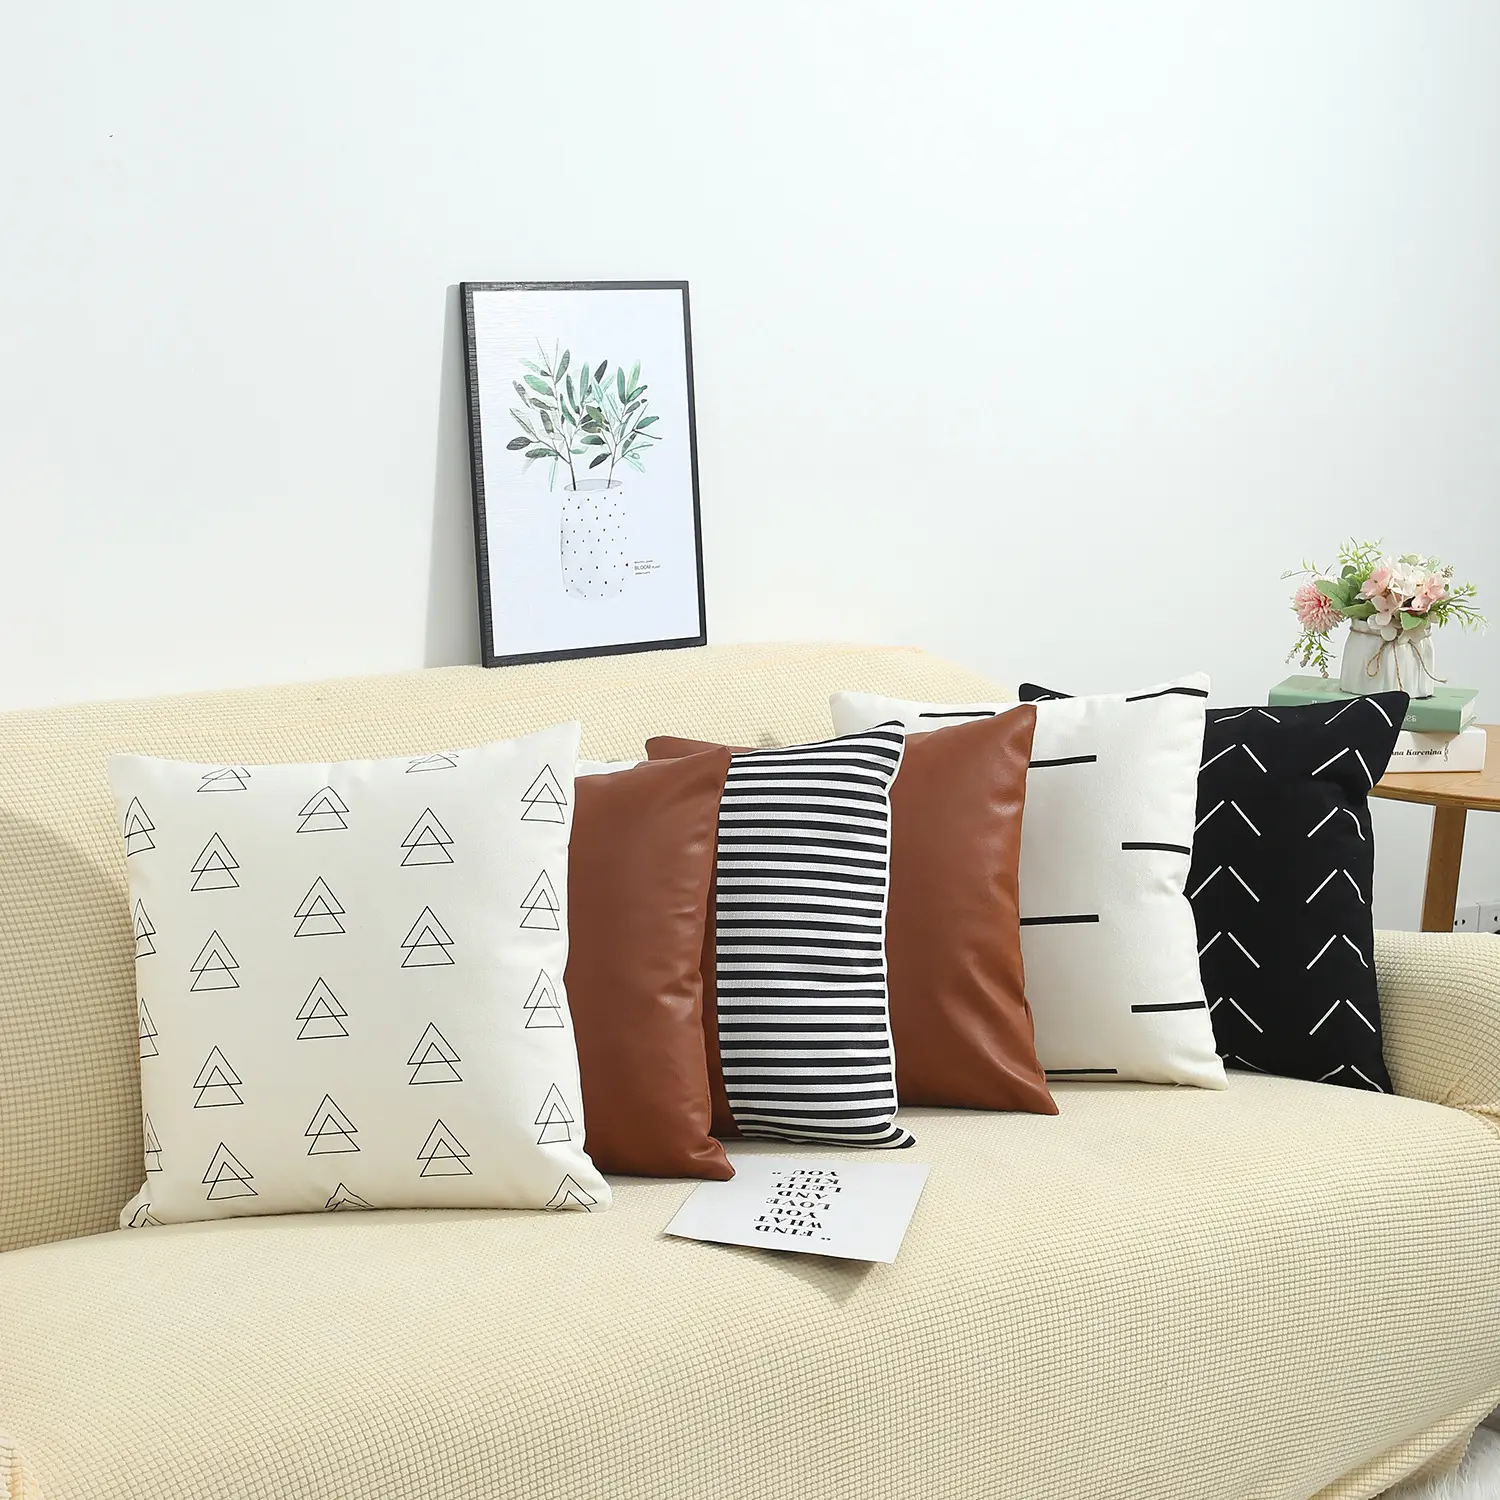 Square Pillow Covers Home Decorative Throw Cushion Cover Sets Geometric Patterns Pillow Cases For Sofa